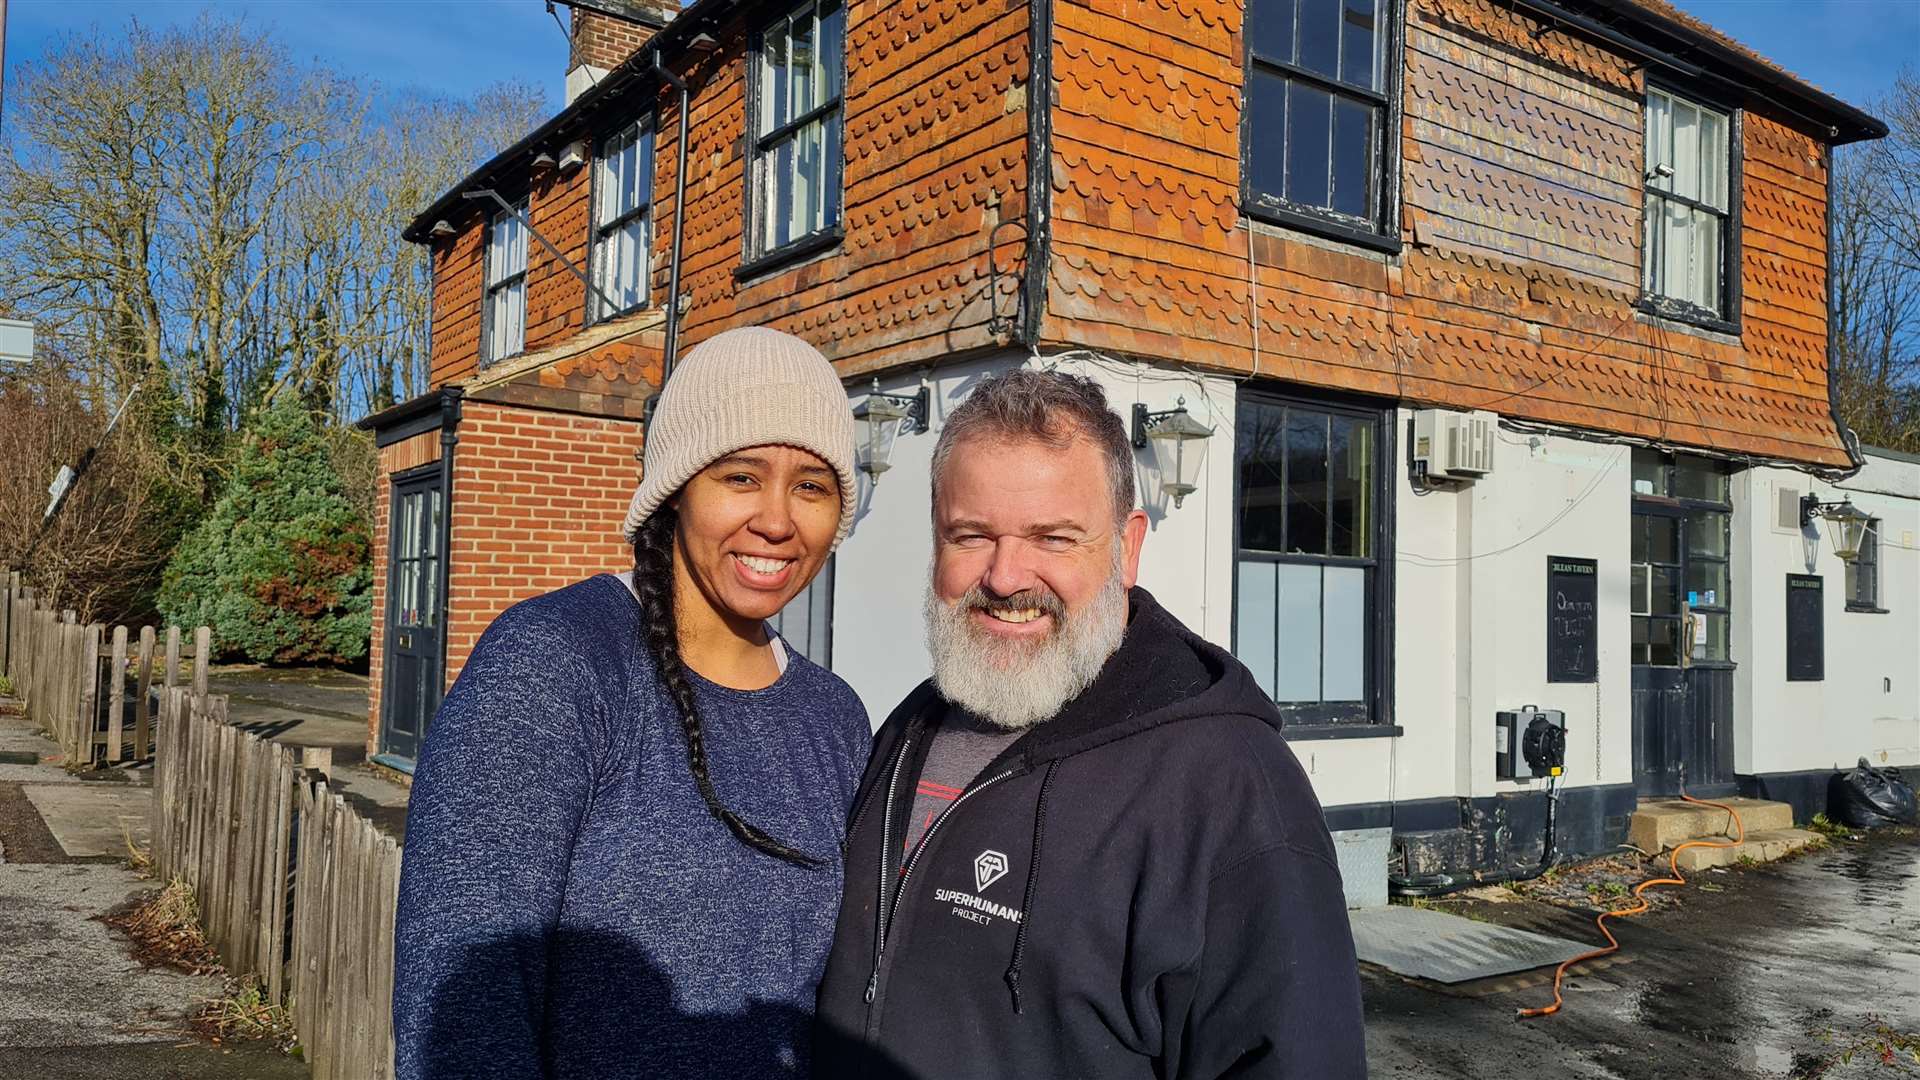 Matthew and Paola Hayden are the new hosts of The Hare at Blean